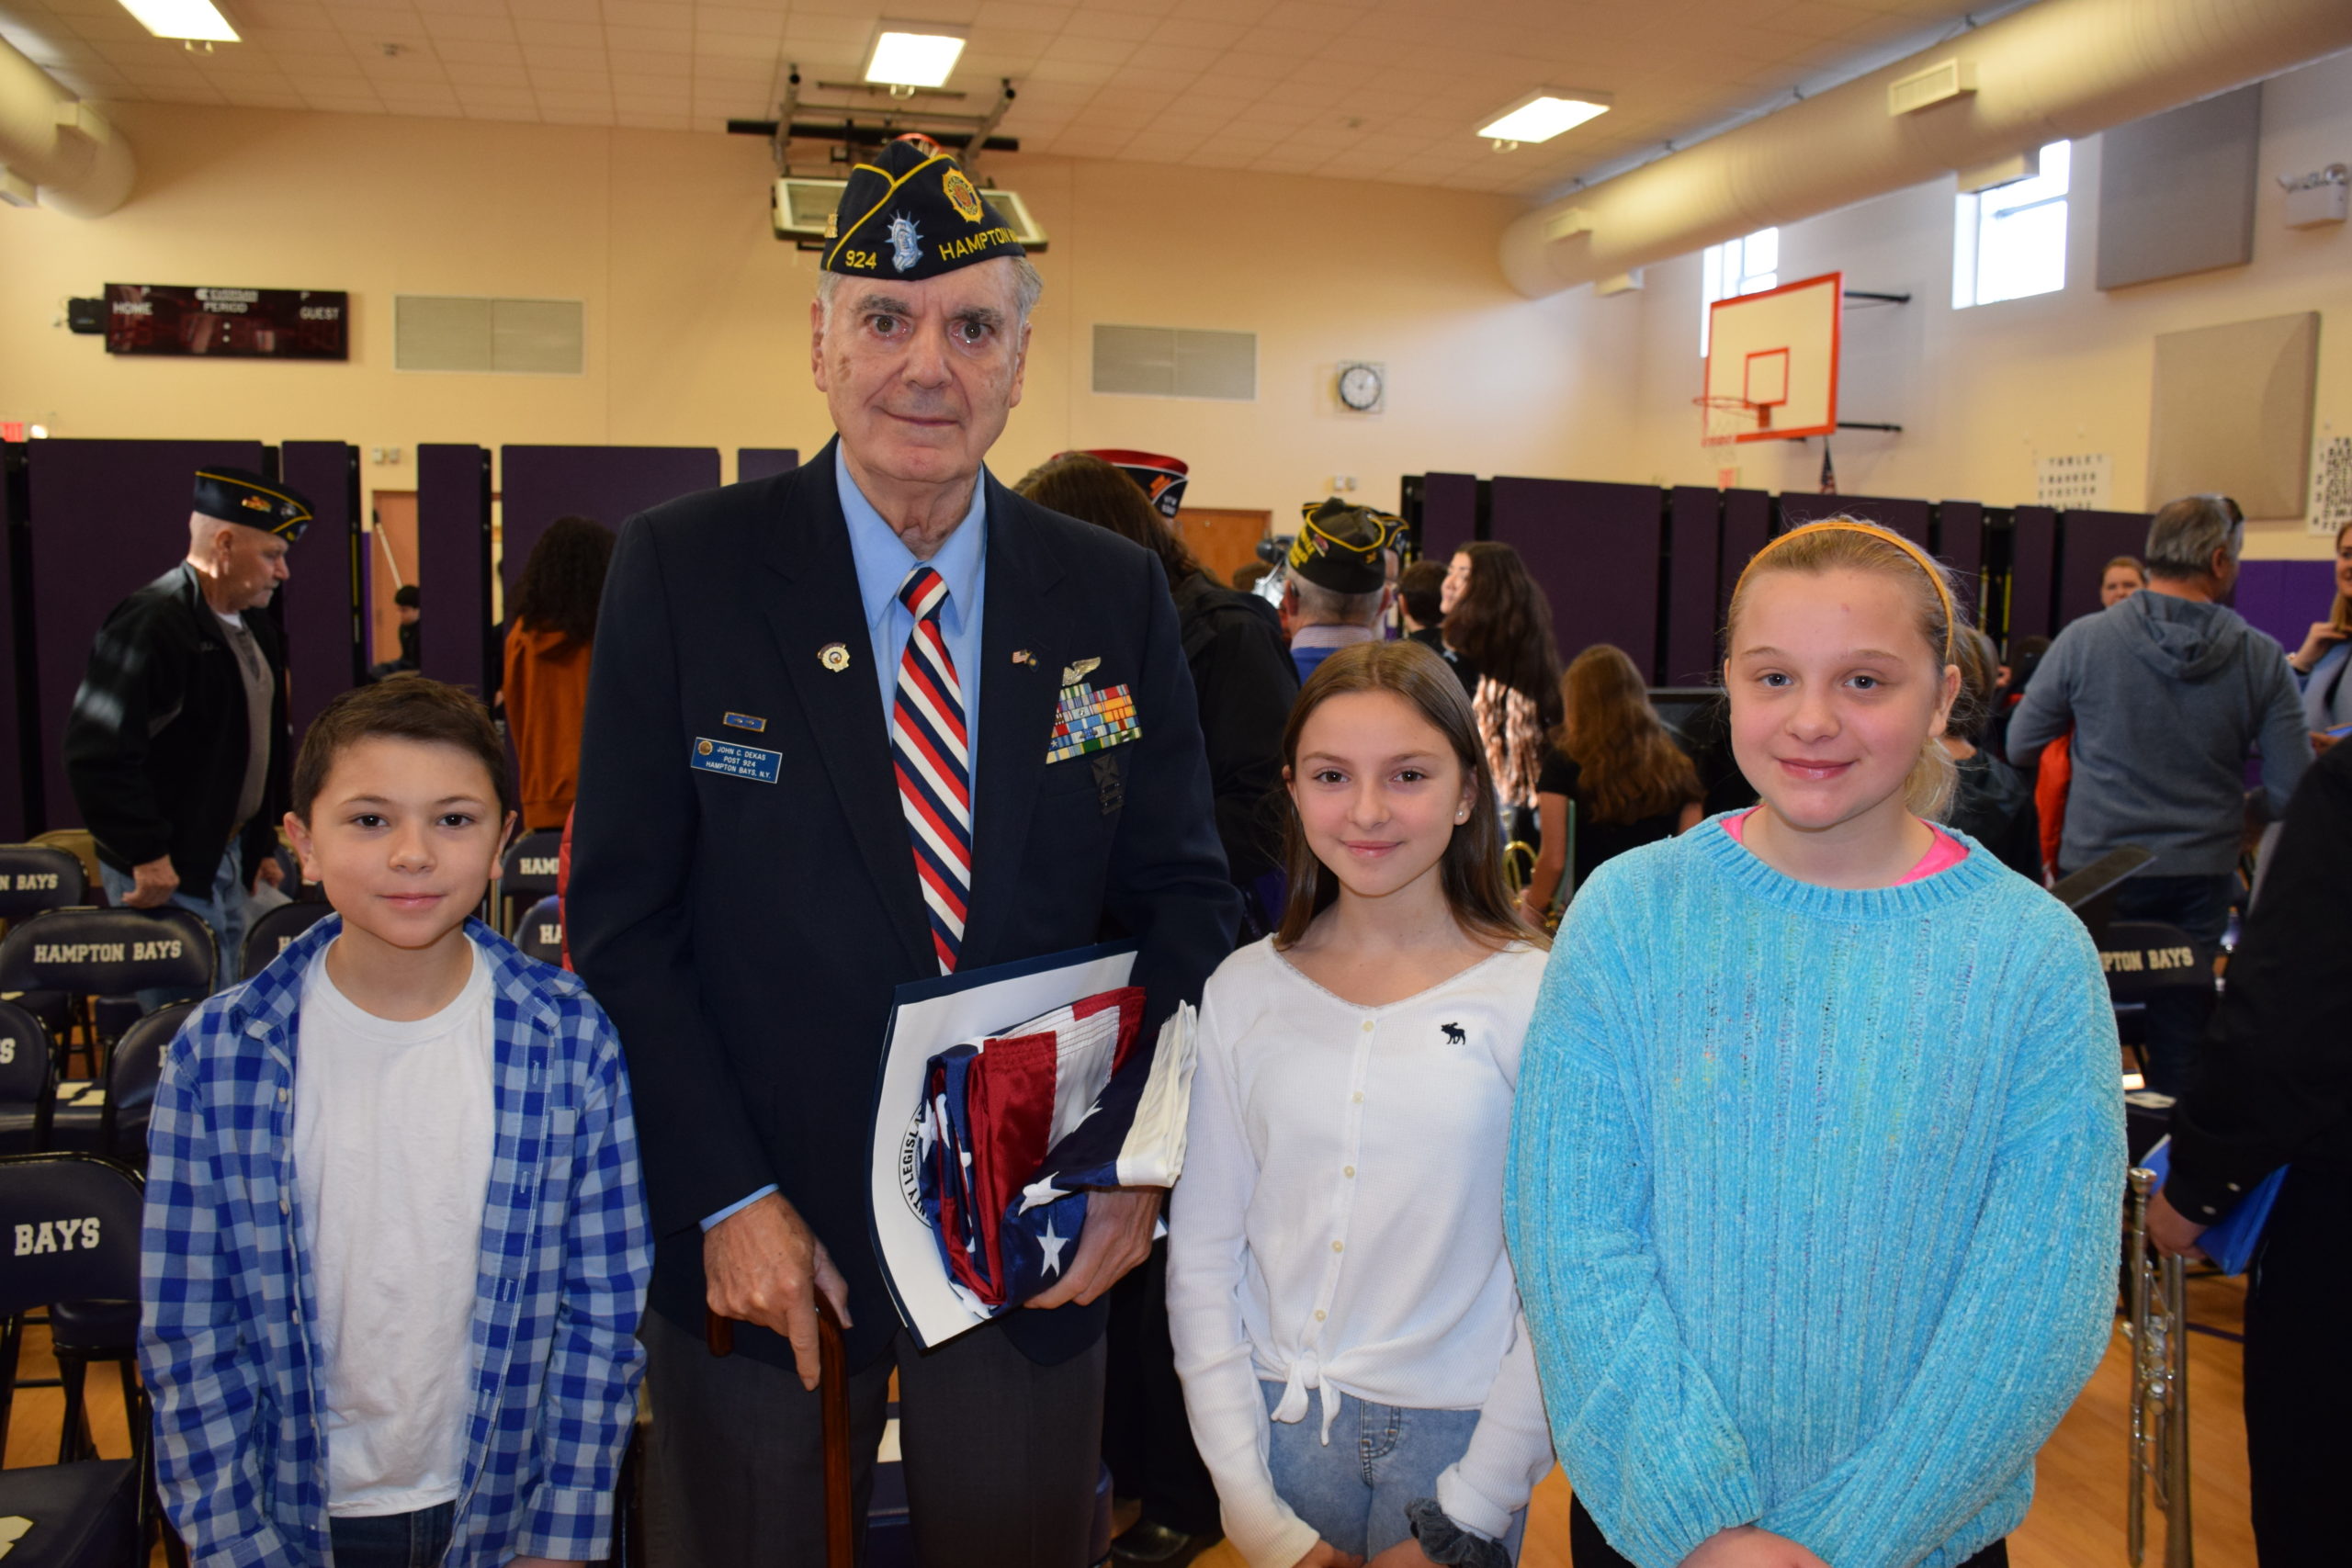 Hampton Bays students, including  Nico Carone, Keira Nappi and Adriana Tapfer, honored U.S Air Force veteran John Constantine Dekas during a flag ceremony on January 24.  